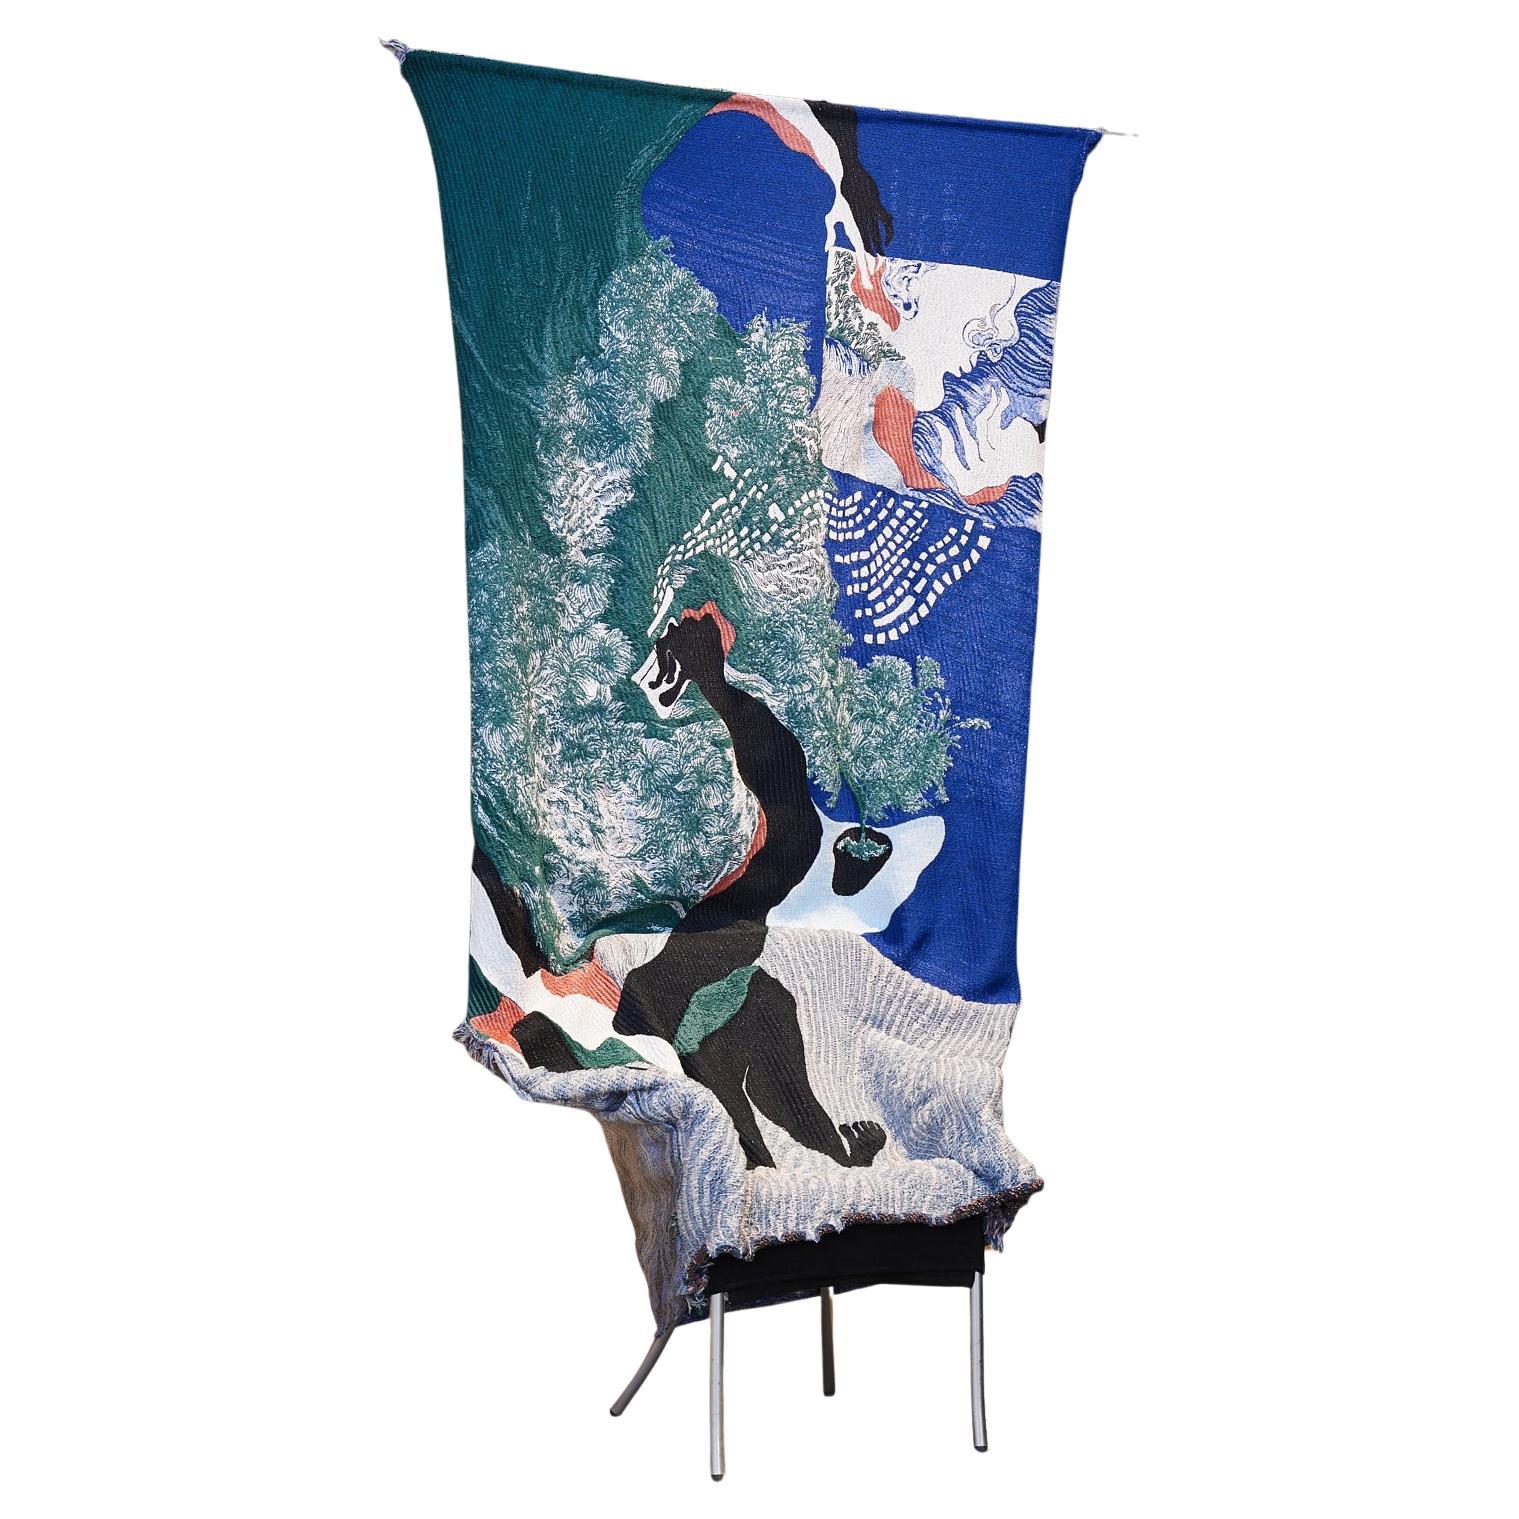 Chair tapestry room divider based on a drawing called "View from the bed" For Sale